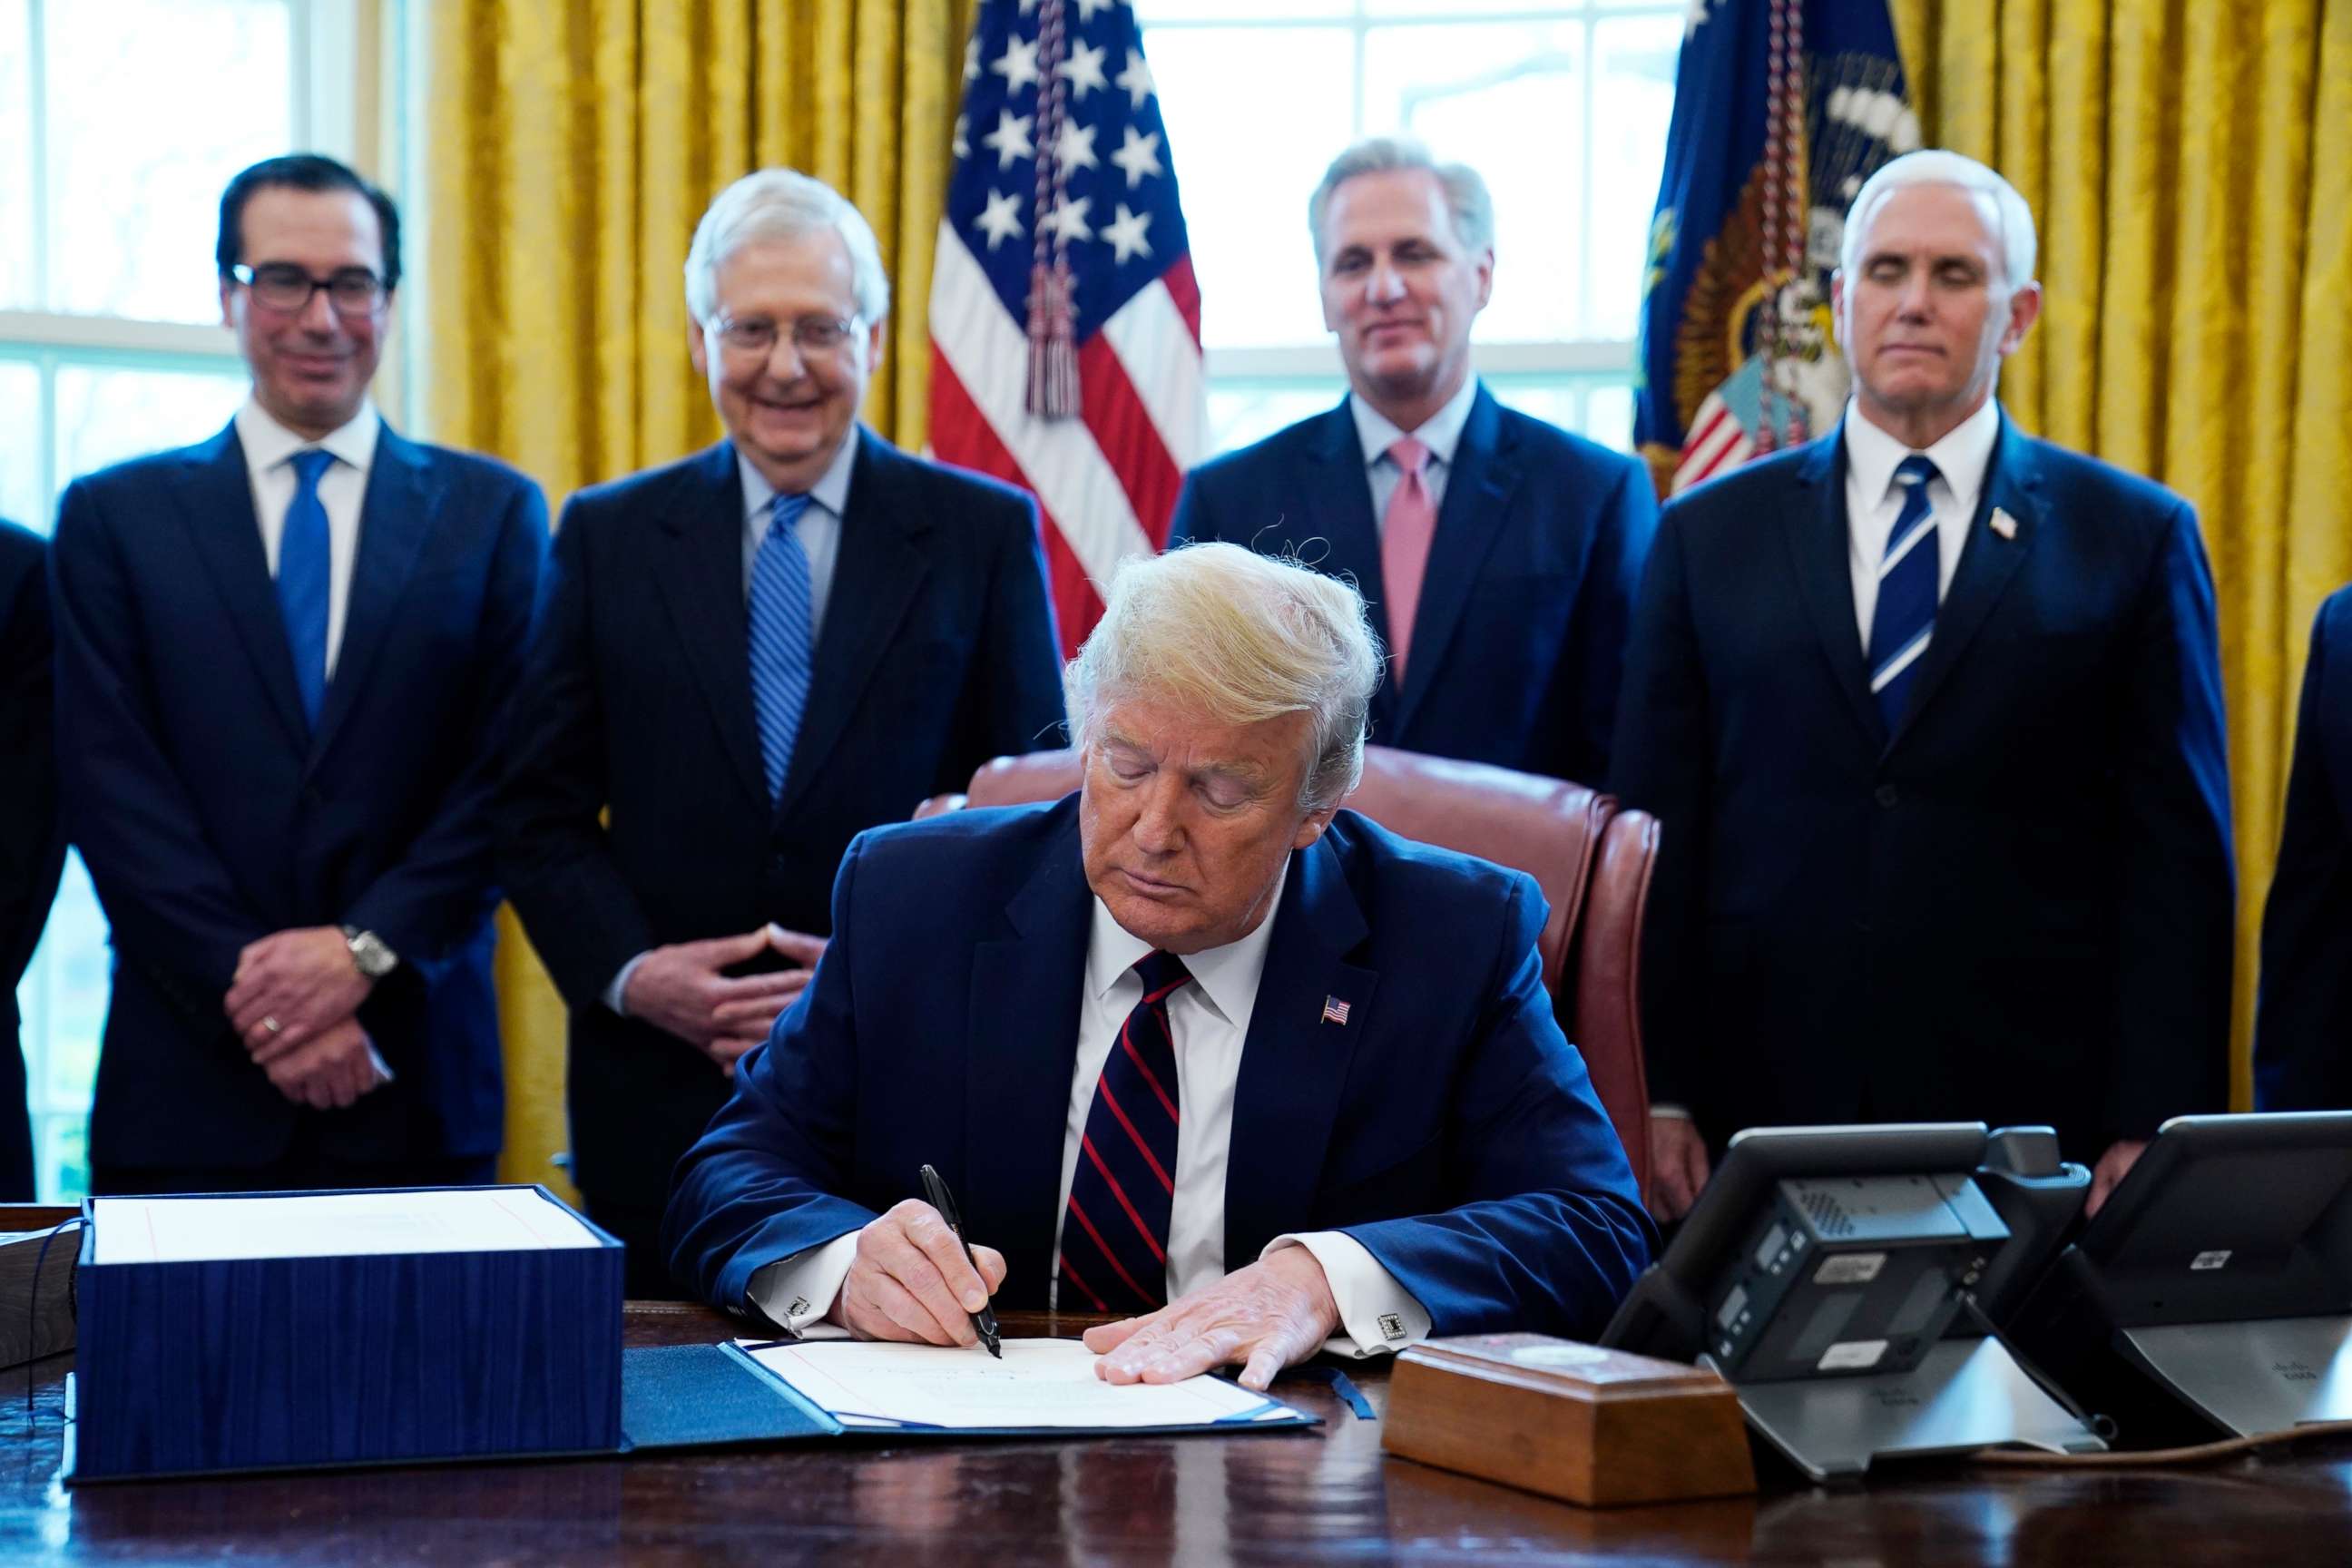 PHOTO: In this March 27, 2020 file photo, President Donald Trump signs the coronavirus stimulus relief package, at the White House in Washington.